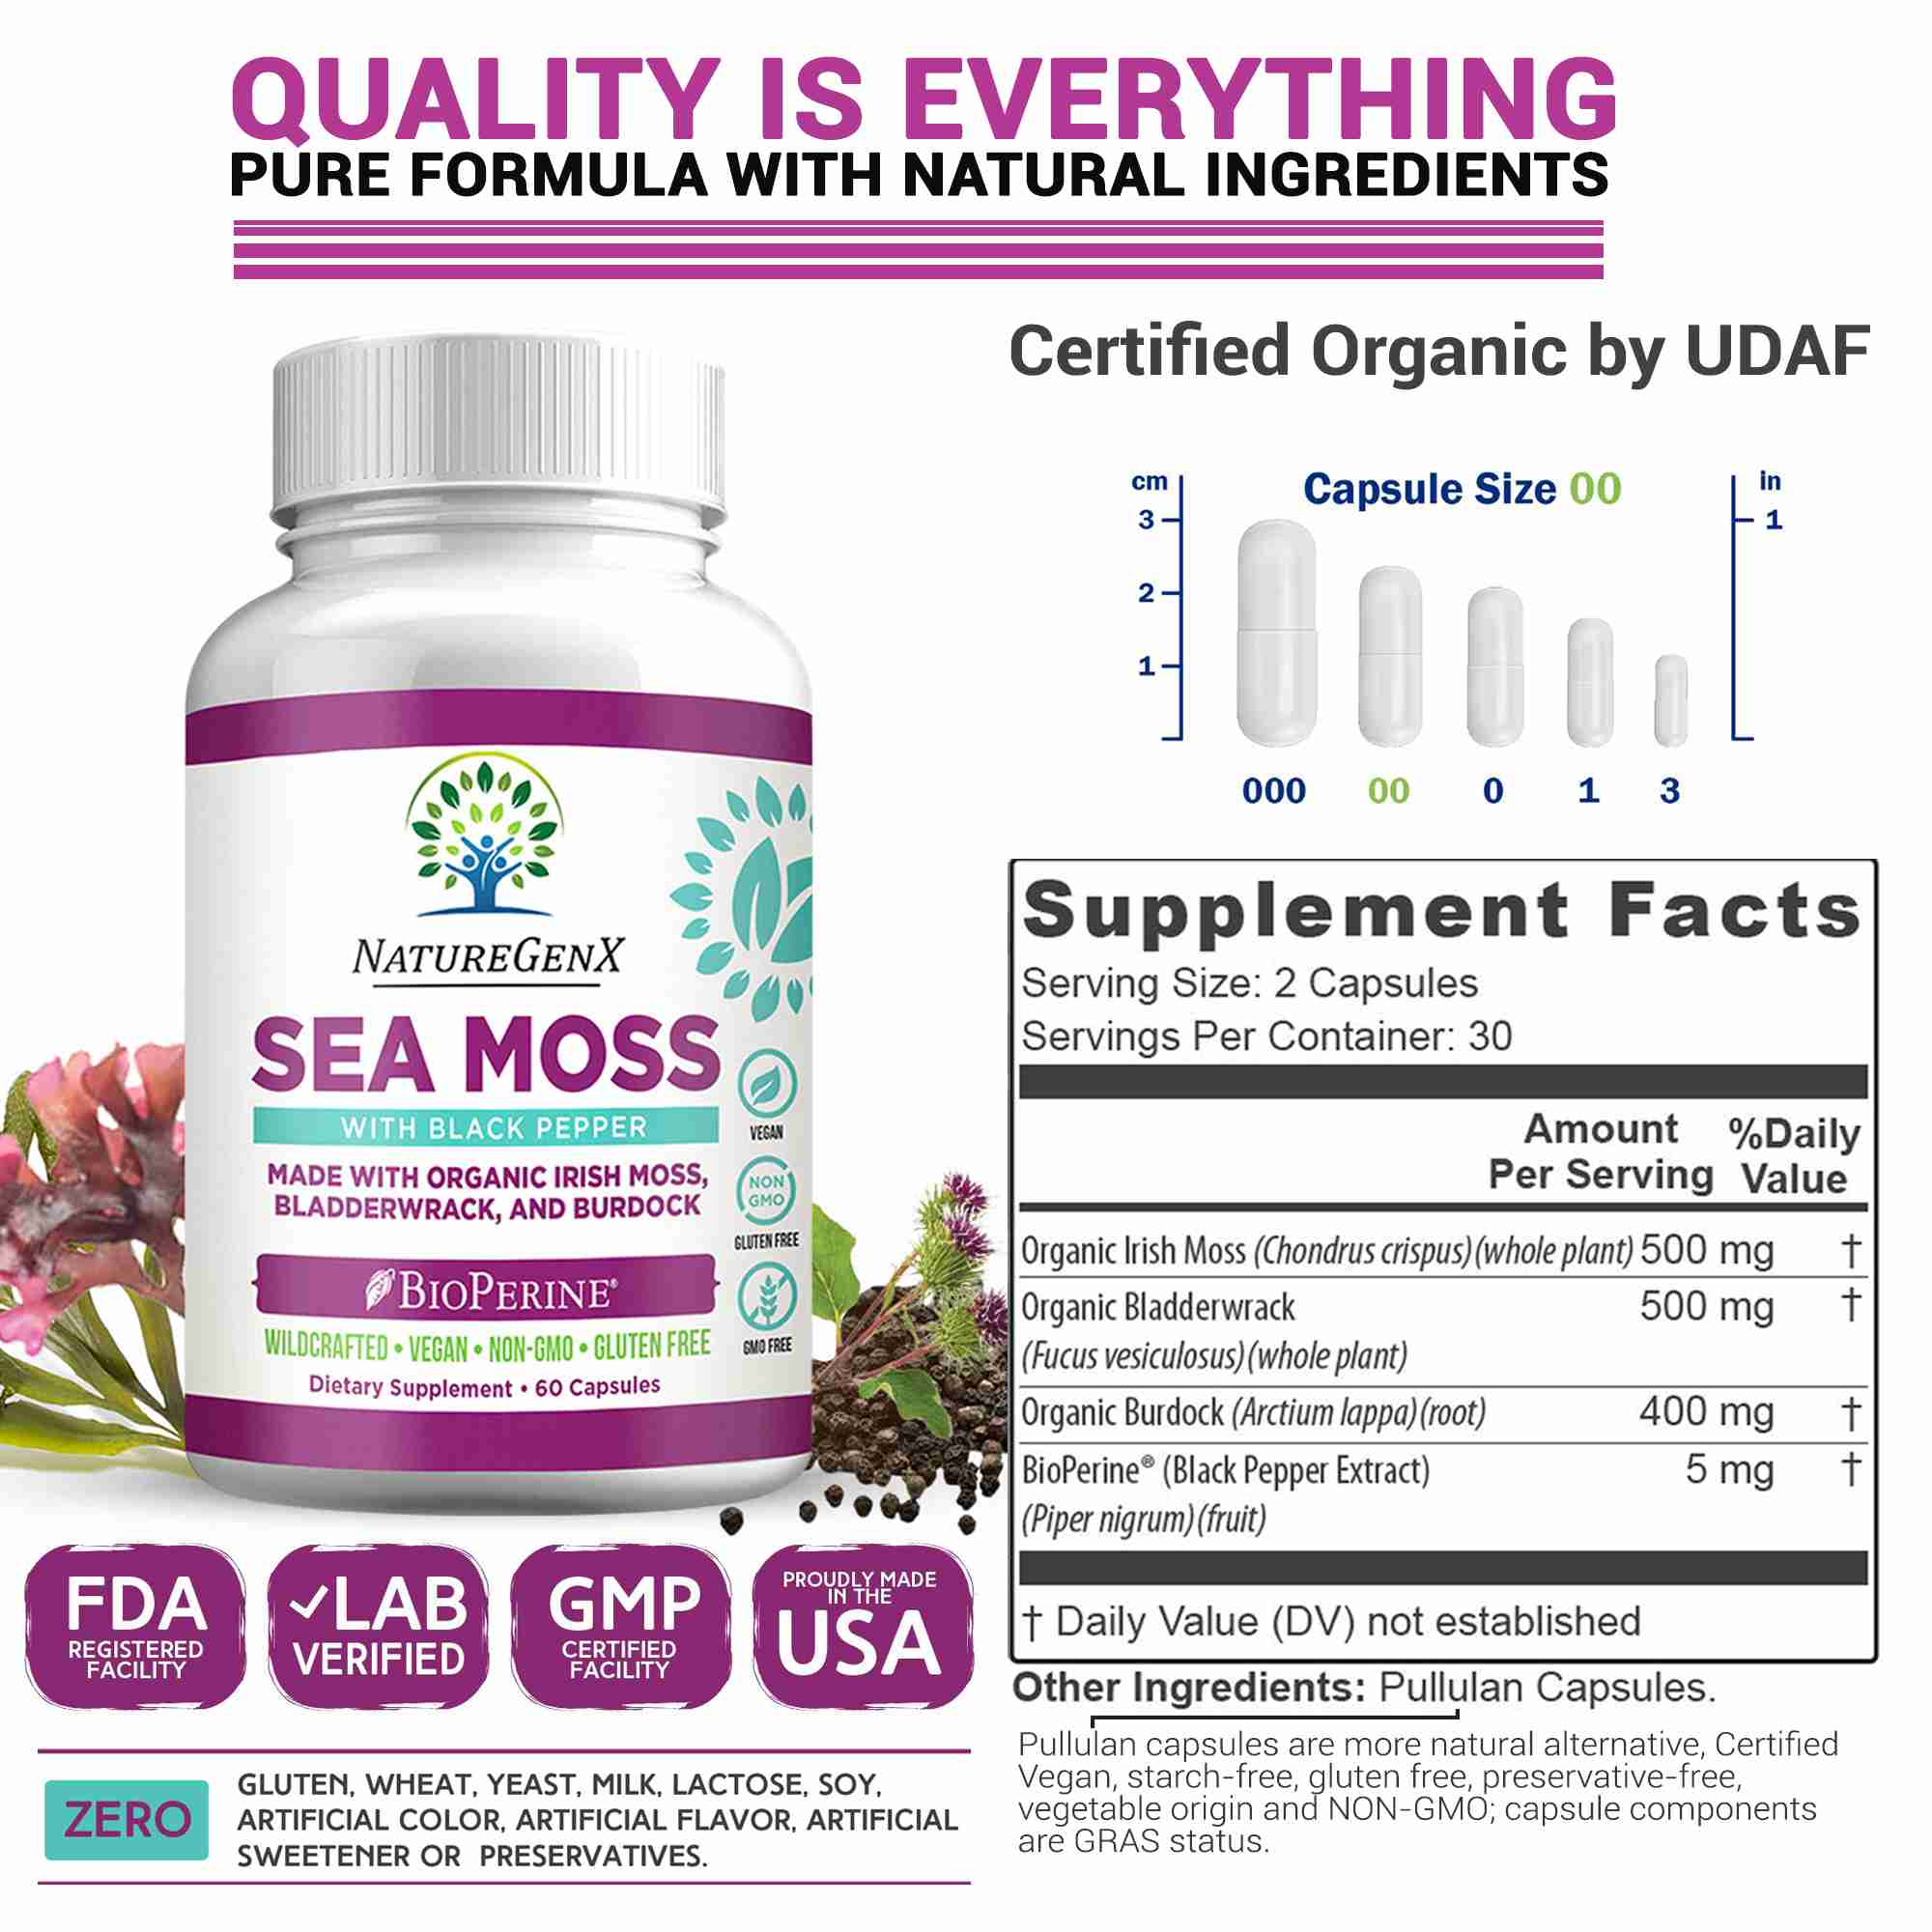 wildcrafted-certified-organic-irish-sea-moss-capsules-plus for cheap